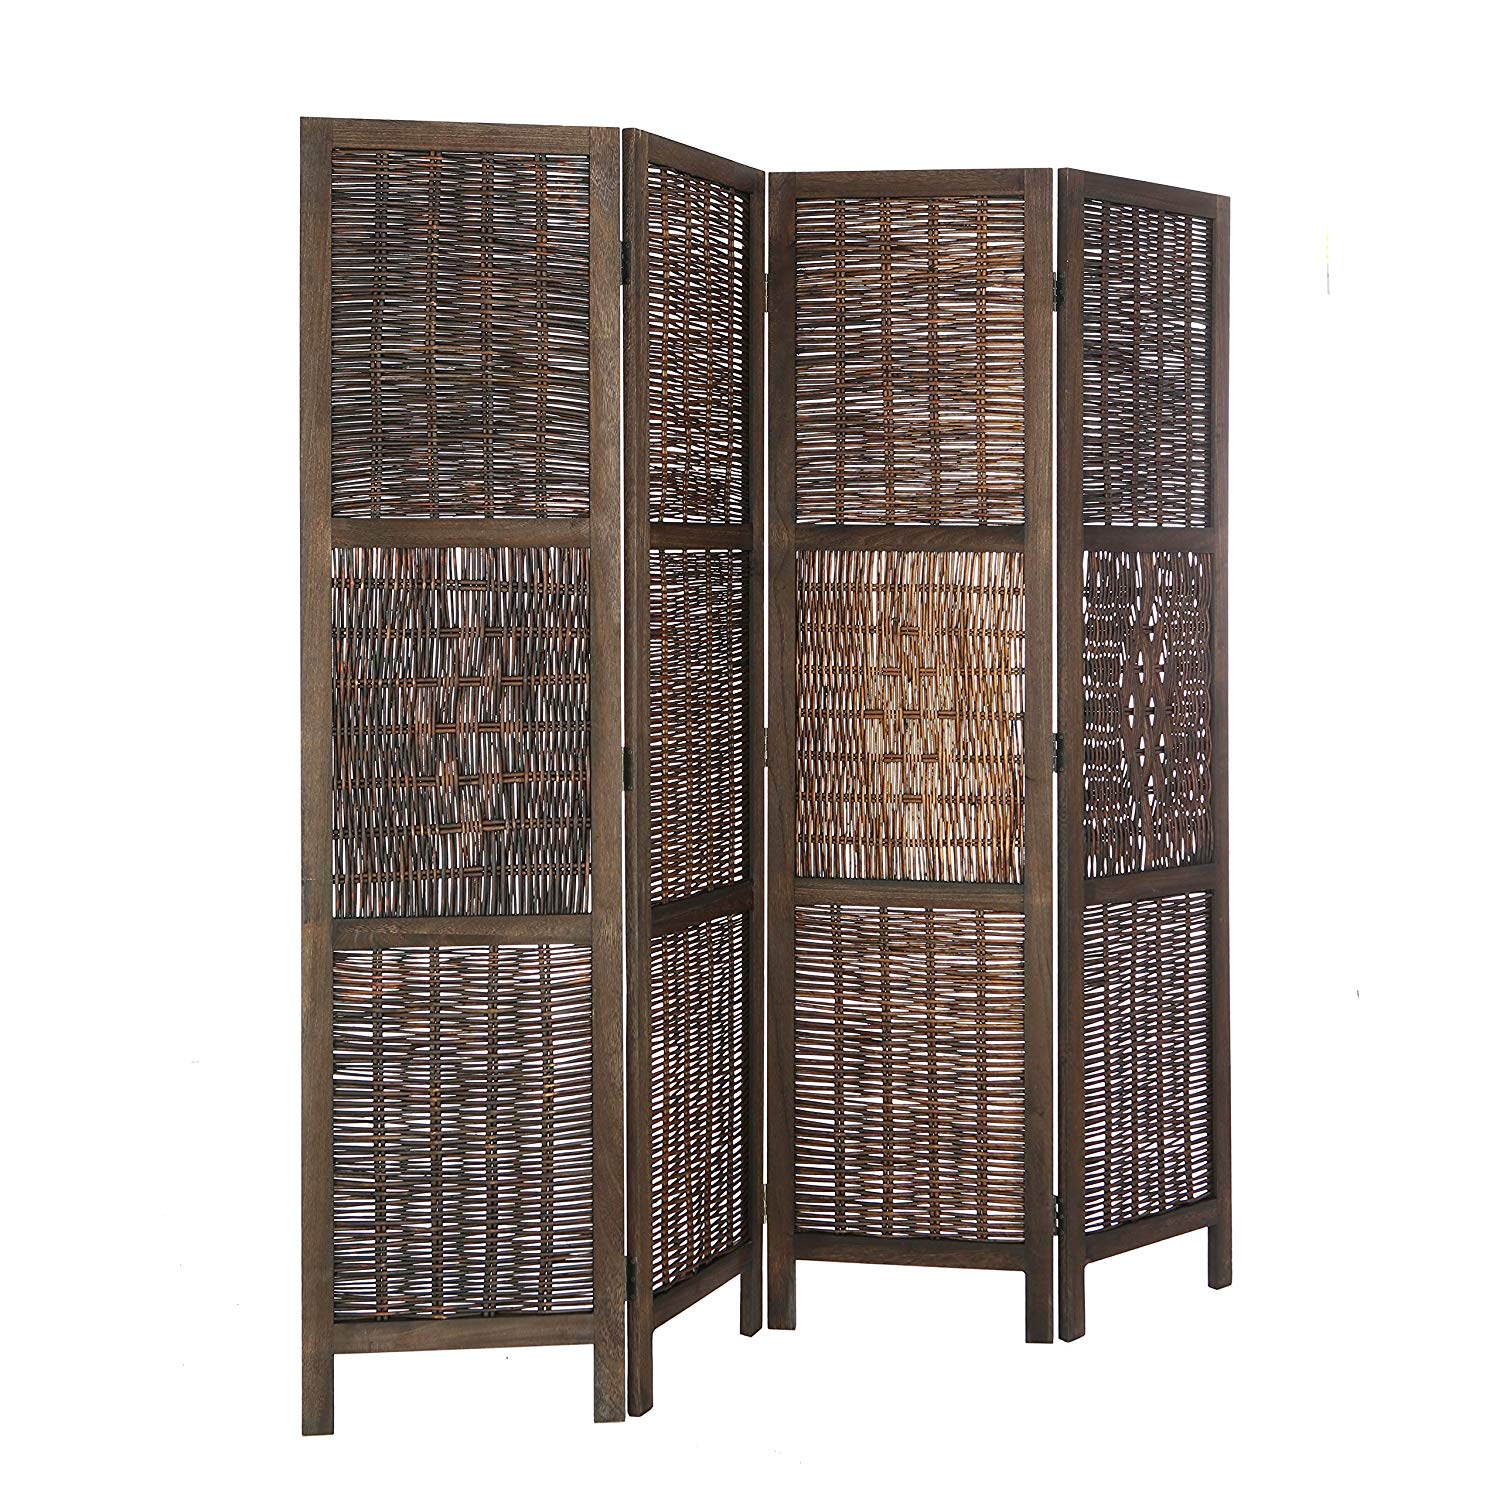 Legacy Decor Antique Wicker and Wood Diamond Design 4 Panel Room Divider, 67" Tall, Brown - image 2 of 5